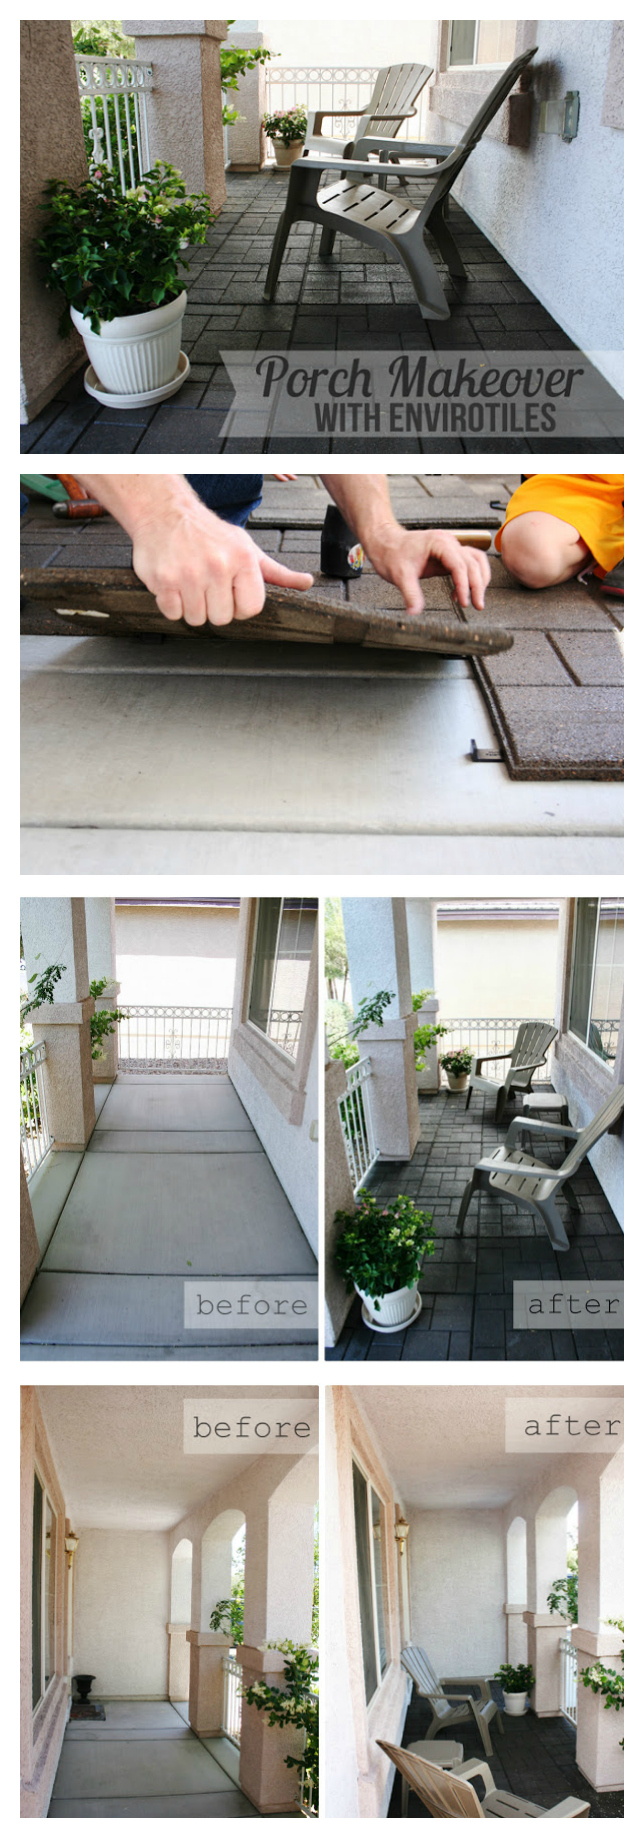 Our Front Porch Makeover using Envirotiles